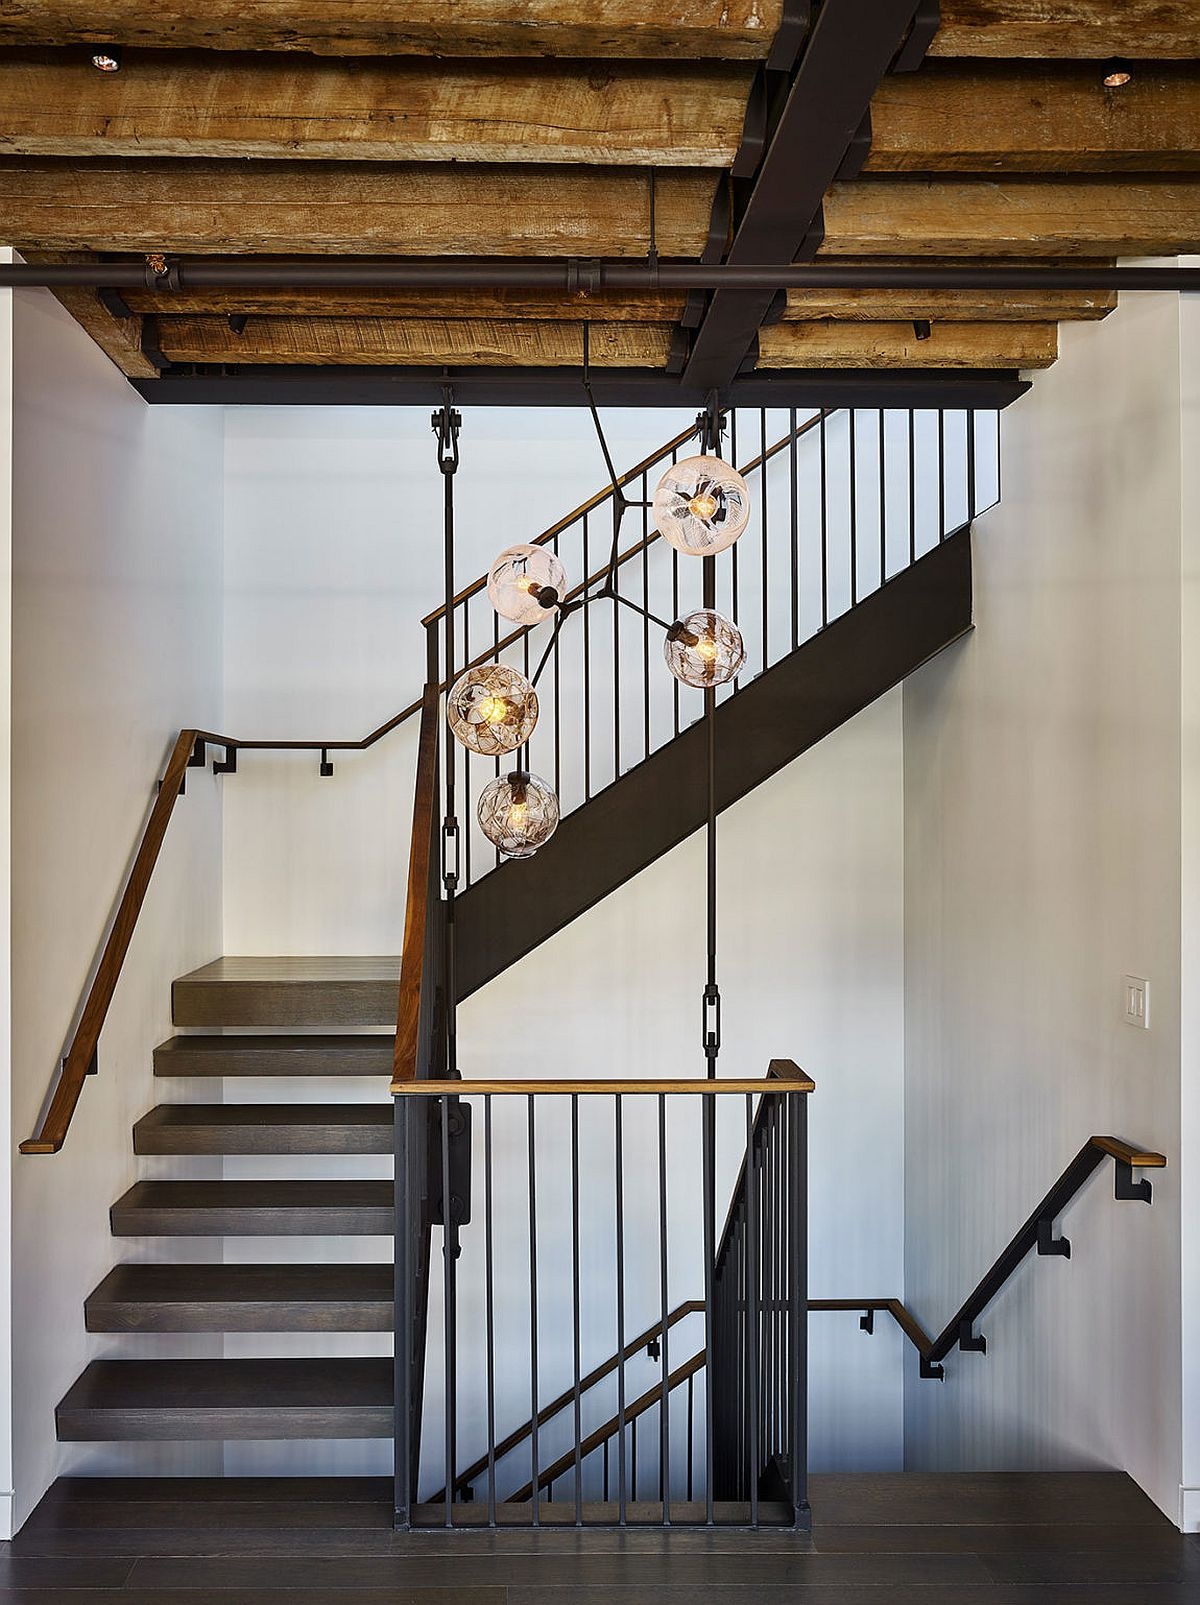 exposed-wooden-beams-and-metallic-elements-inside-the-new-york-penthouse